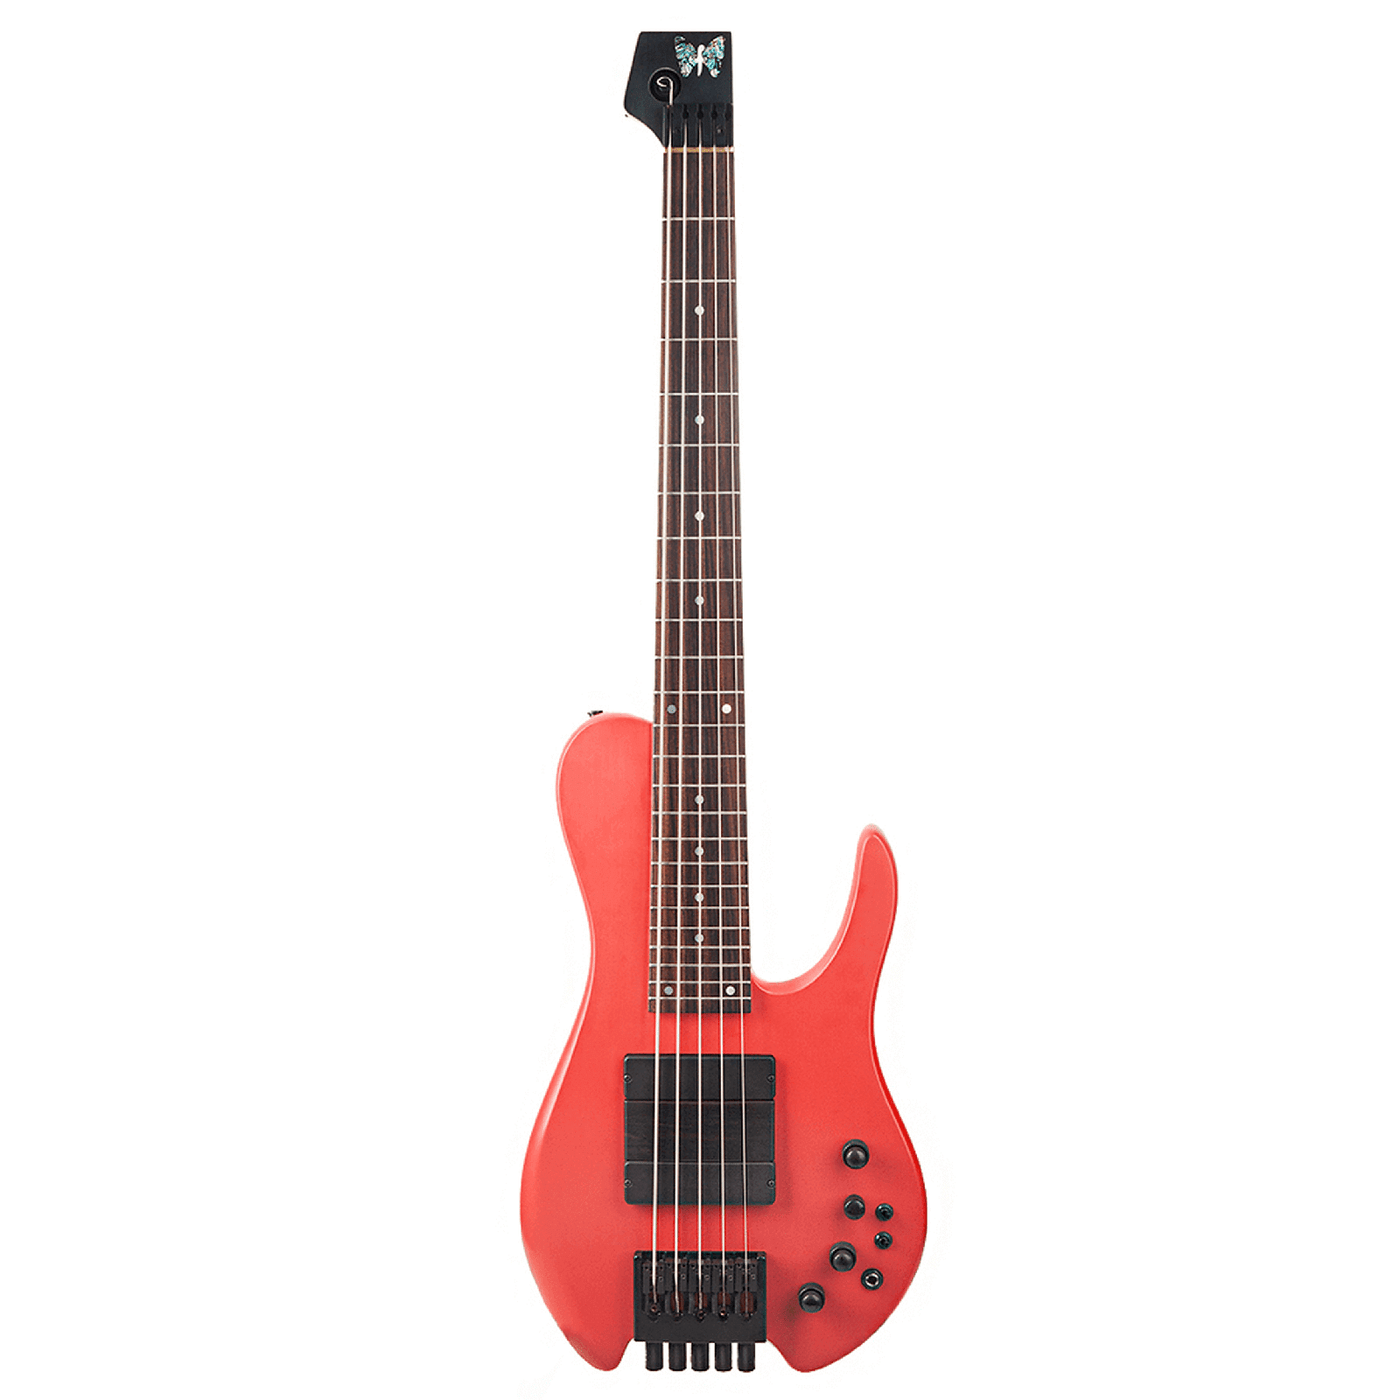 Fodera Matthew Garrison Imperial Mini Fiesta Red - Fodera Guitars is proud to introduce the all-new Imperial Mini-MG! Designed in collaboration with Fodera artist and good friend, Matthew Garrison, the Mini-MG marks the next innovative chapter in bass gui